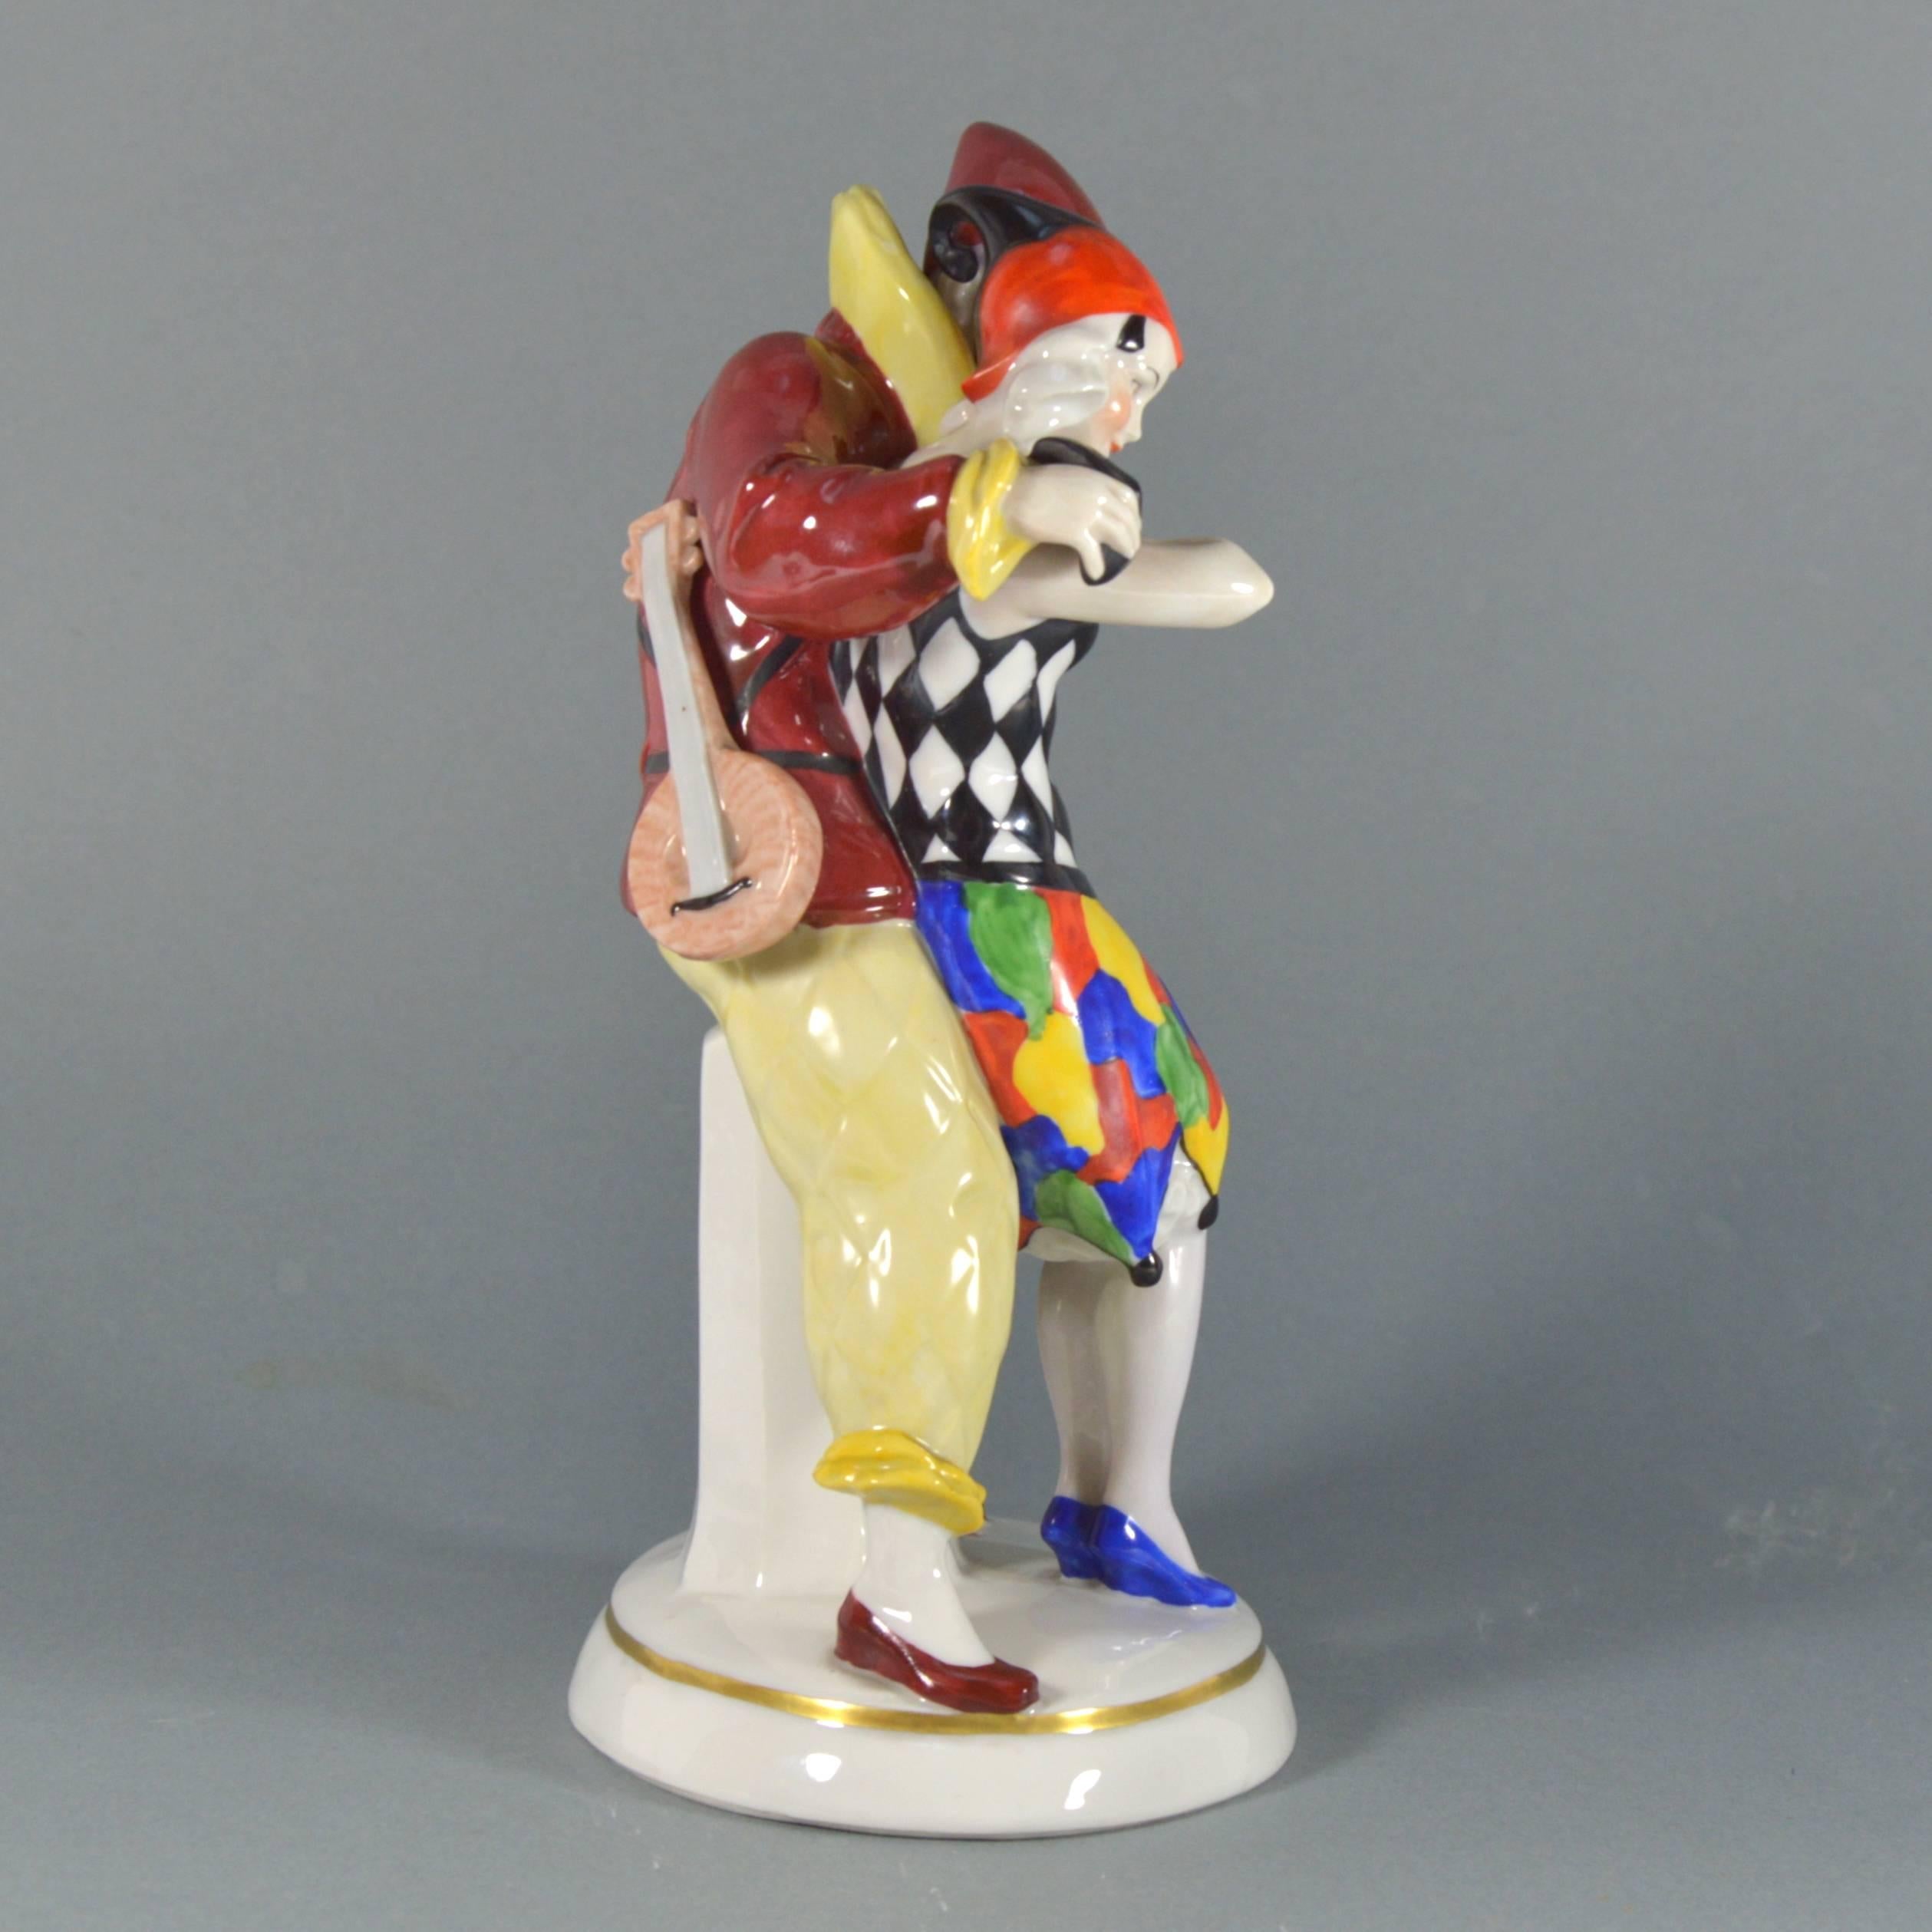 Gorgeous porcelain figurine group: Harlequin and Columbine deriving from Commedia Dell’arte. By German Manufacture Katzhutte.
Blue over glaze mark used between 1914 and 1945.

Measures: Height 23 cm (9 in).

Perfect condition, no cracks, chips